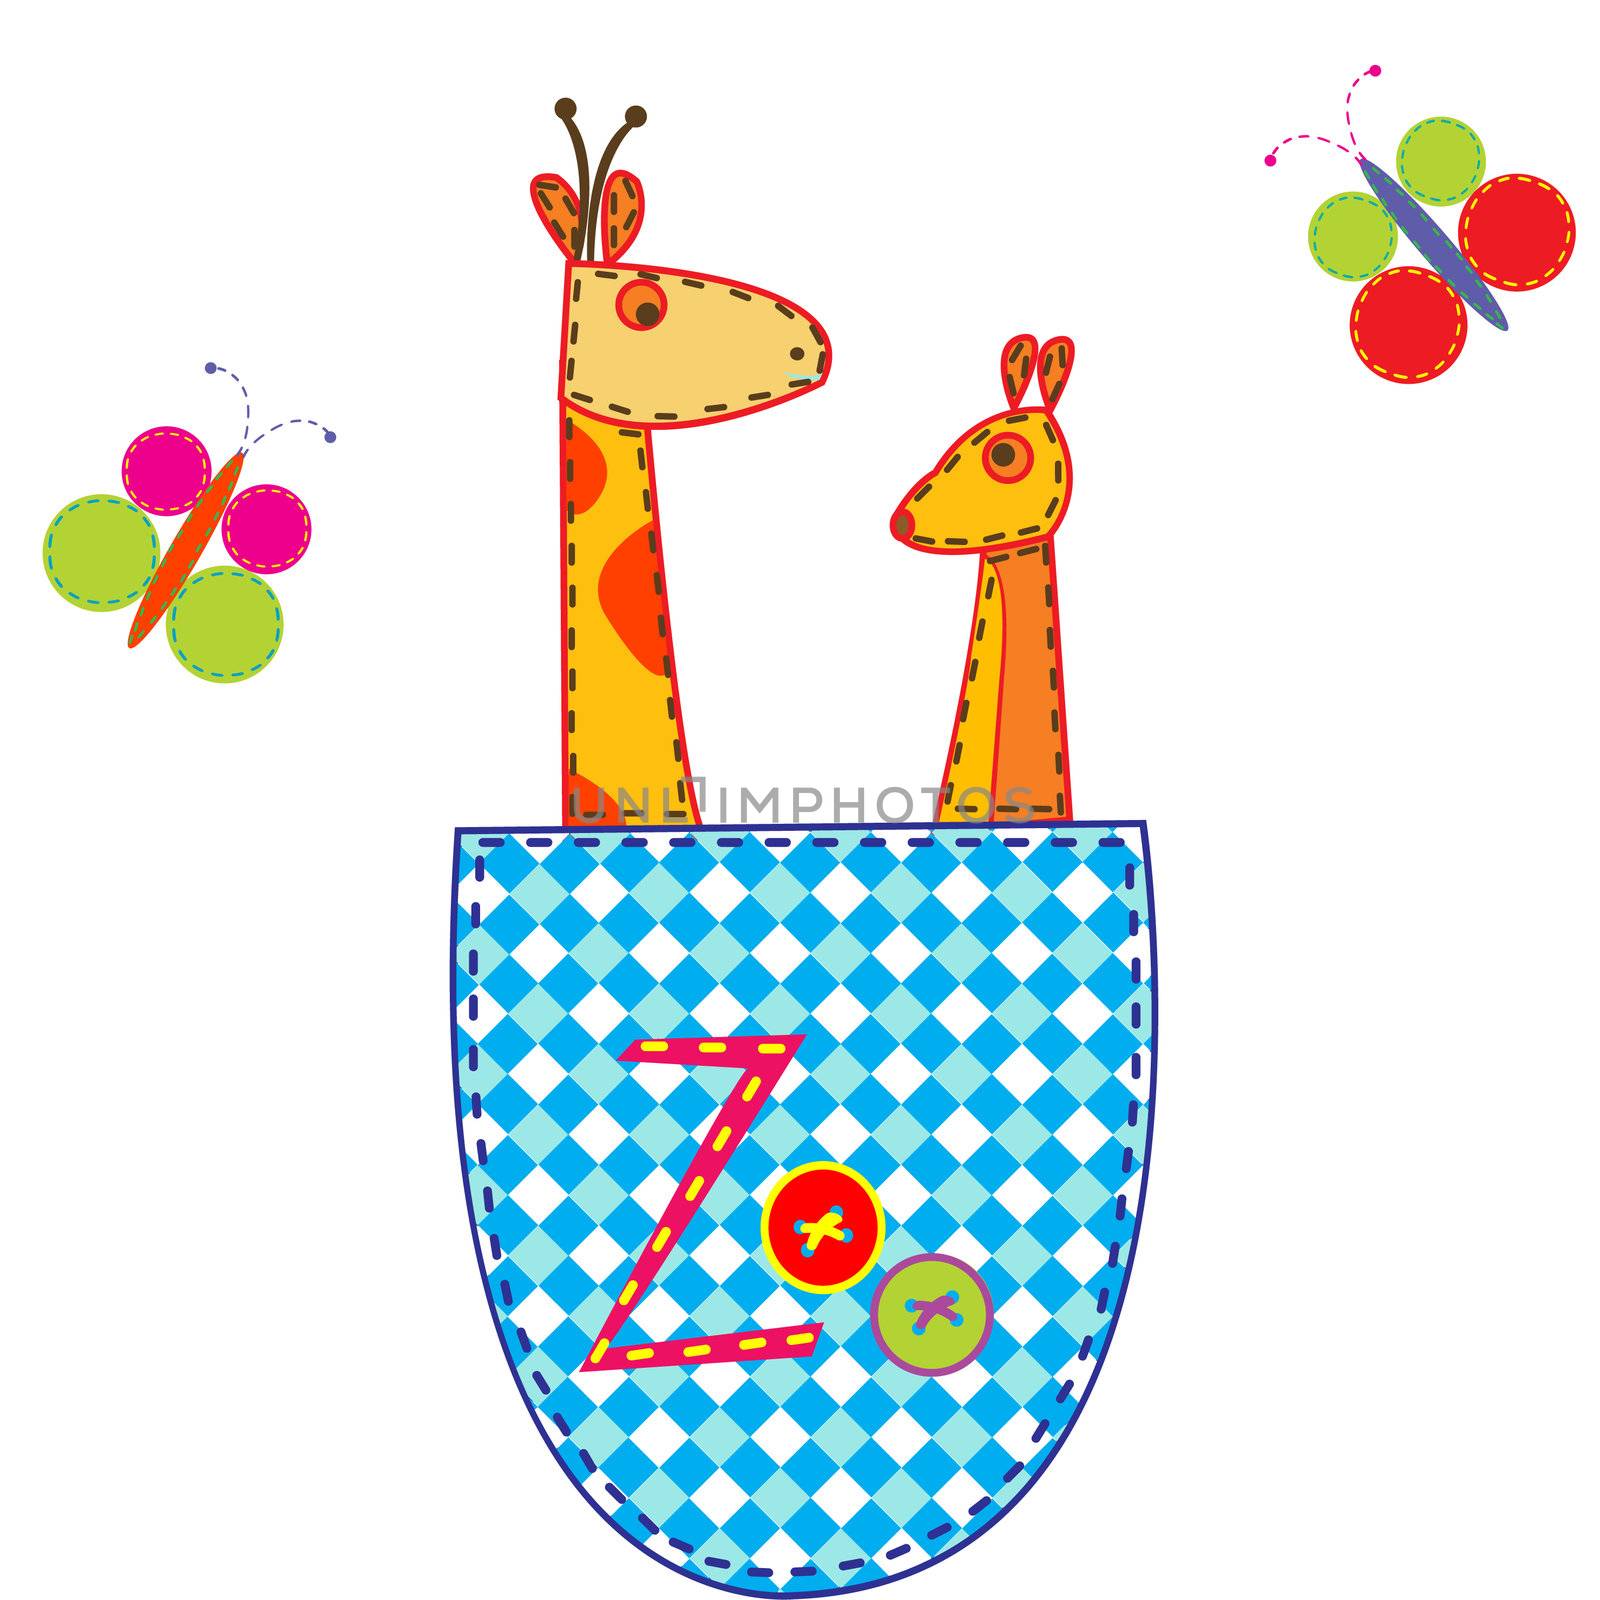 Zoo illustration with giraffe and kangaroo in a pocket by hibrida13